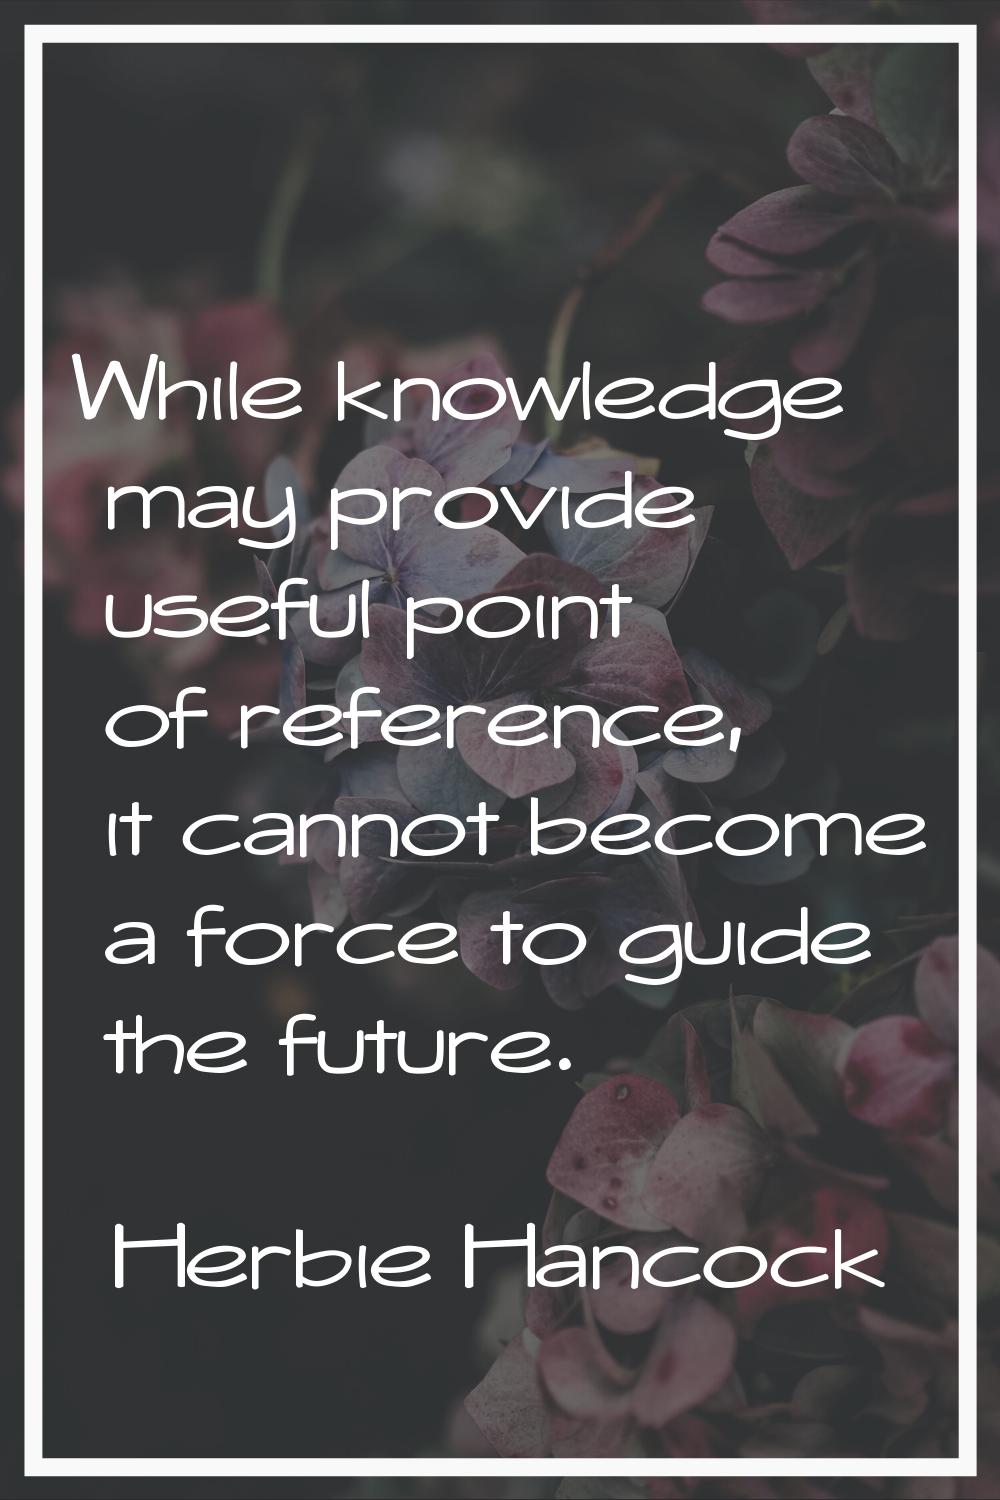 While knowledge may provide useful point of reference, it cannot become a force to guide the future